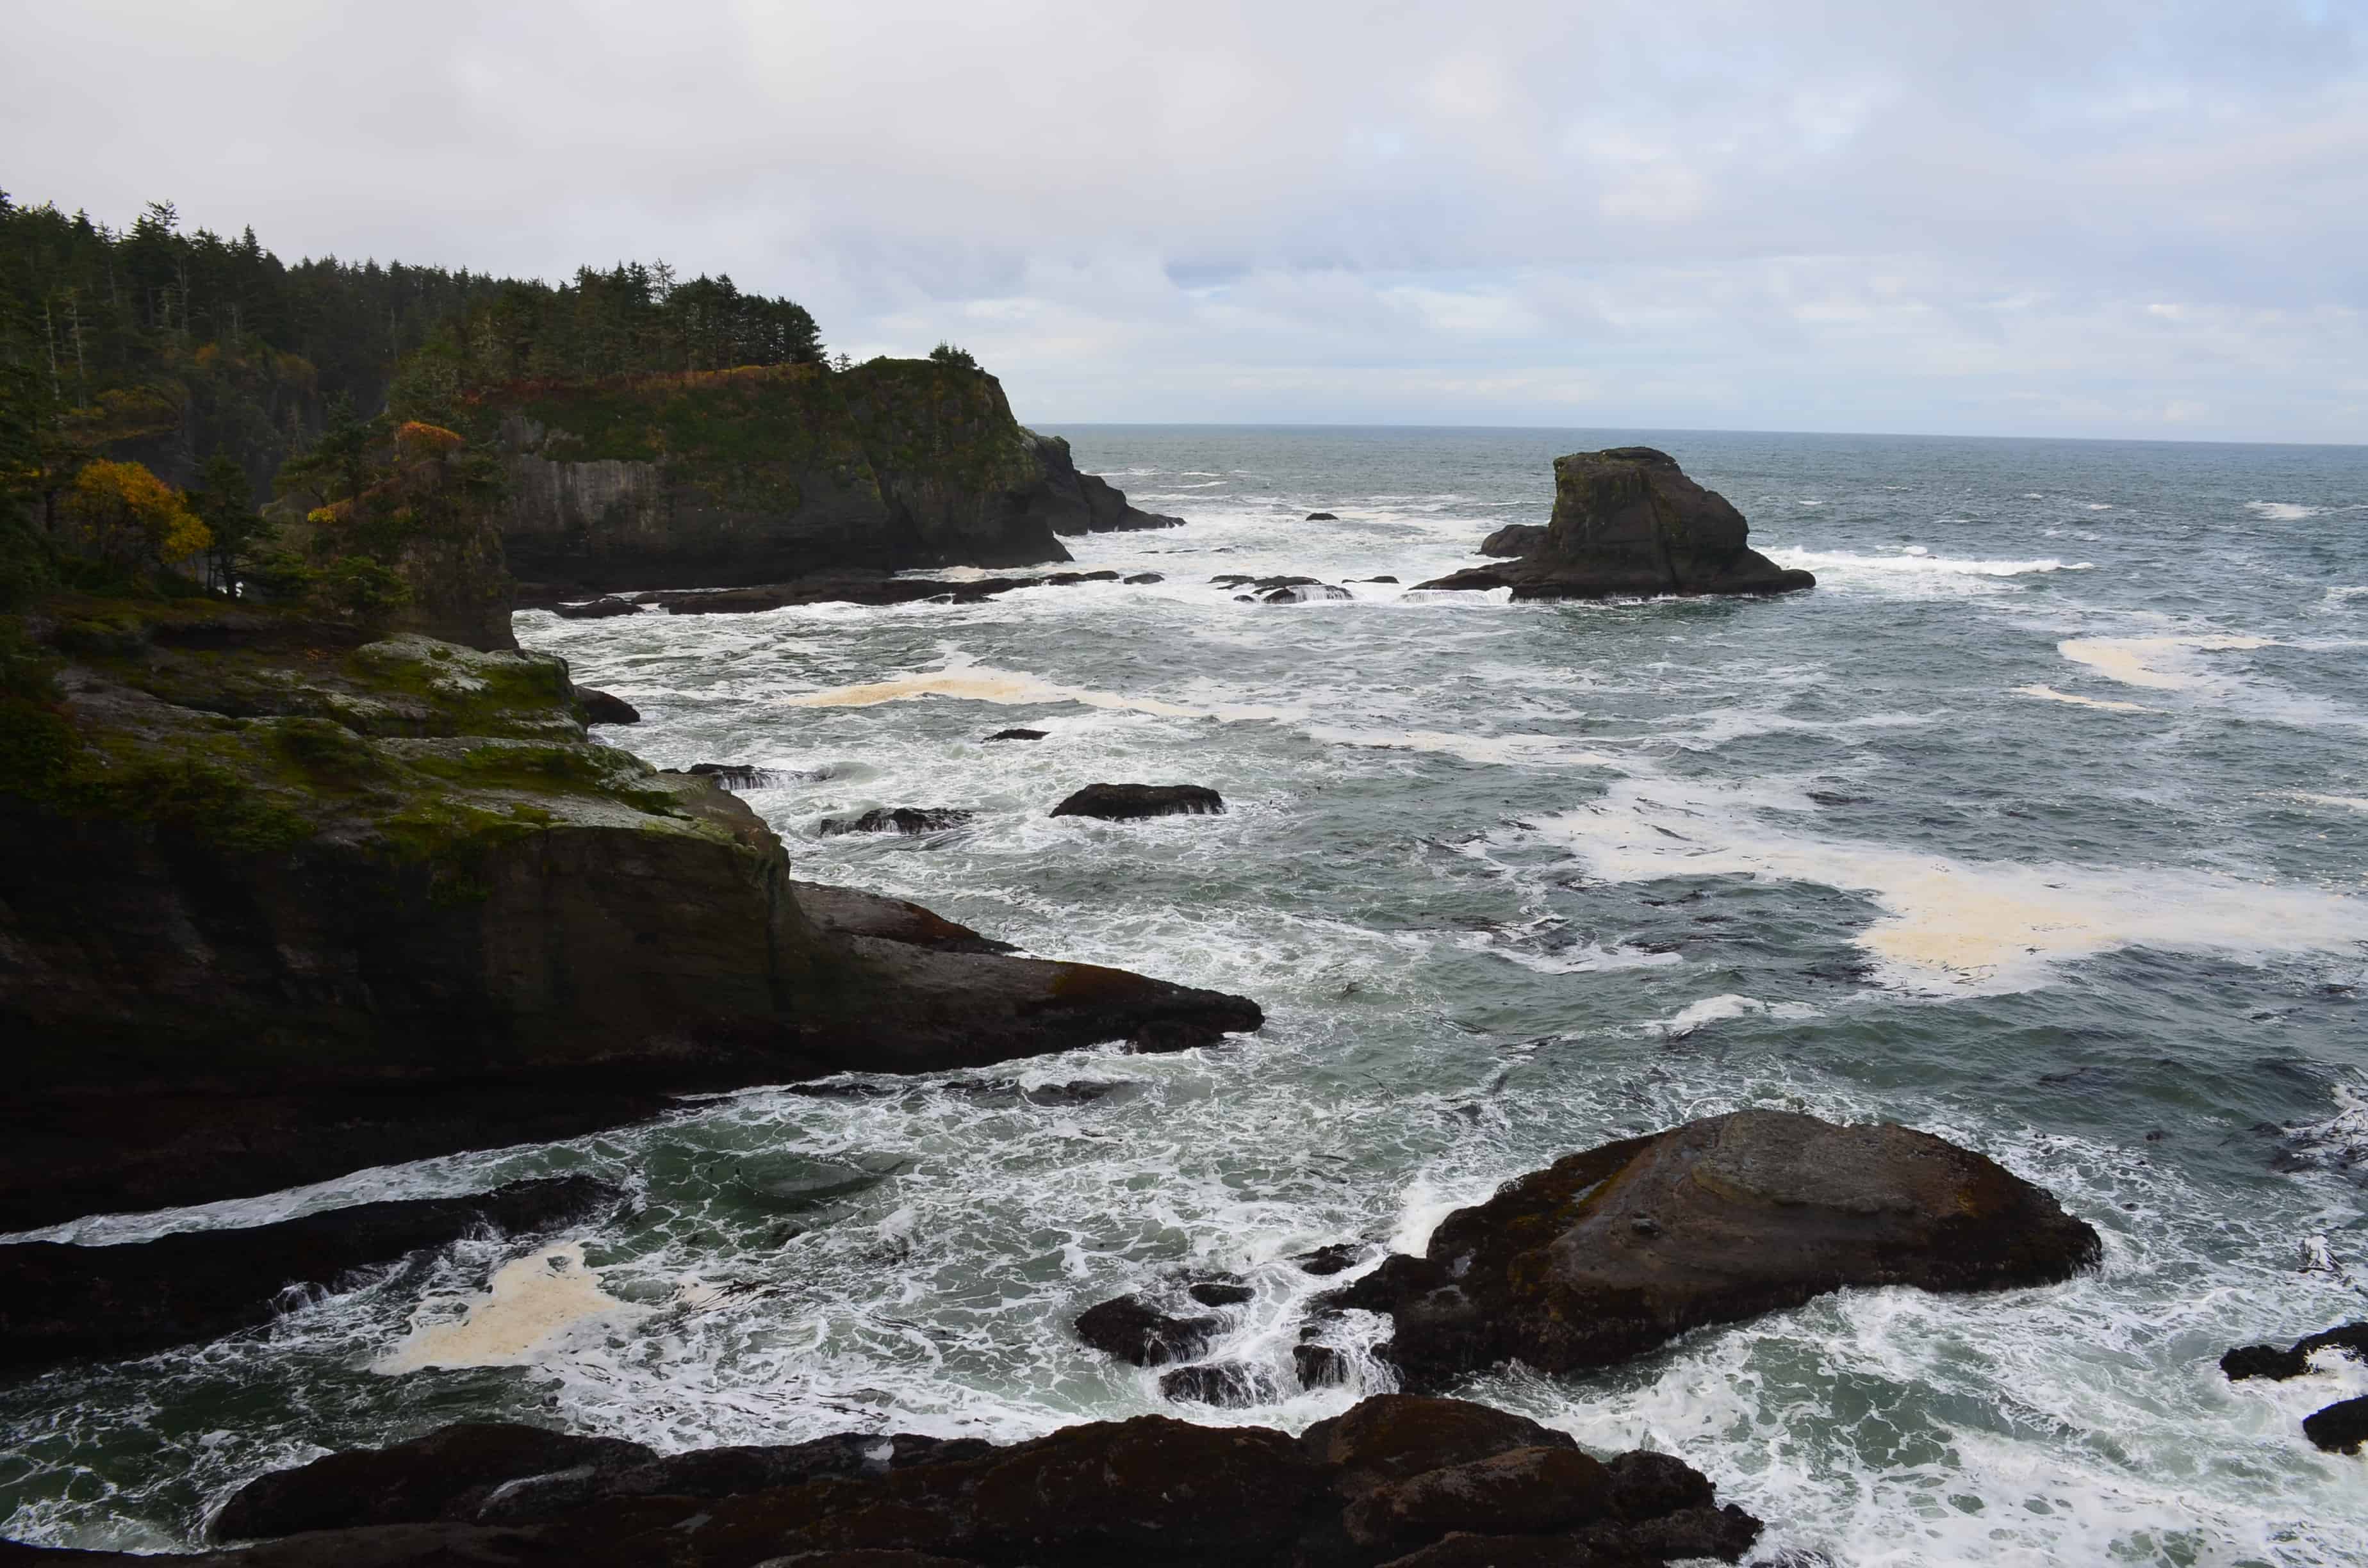 Looking south from the third viewpoint on the Cape Flattery Trail on the Makah Reservation in Washington